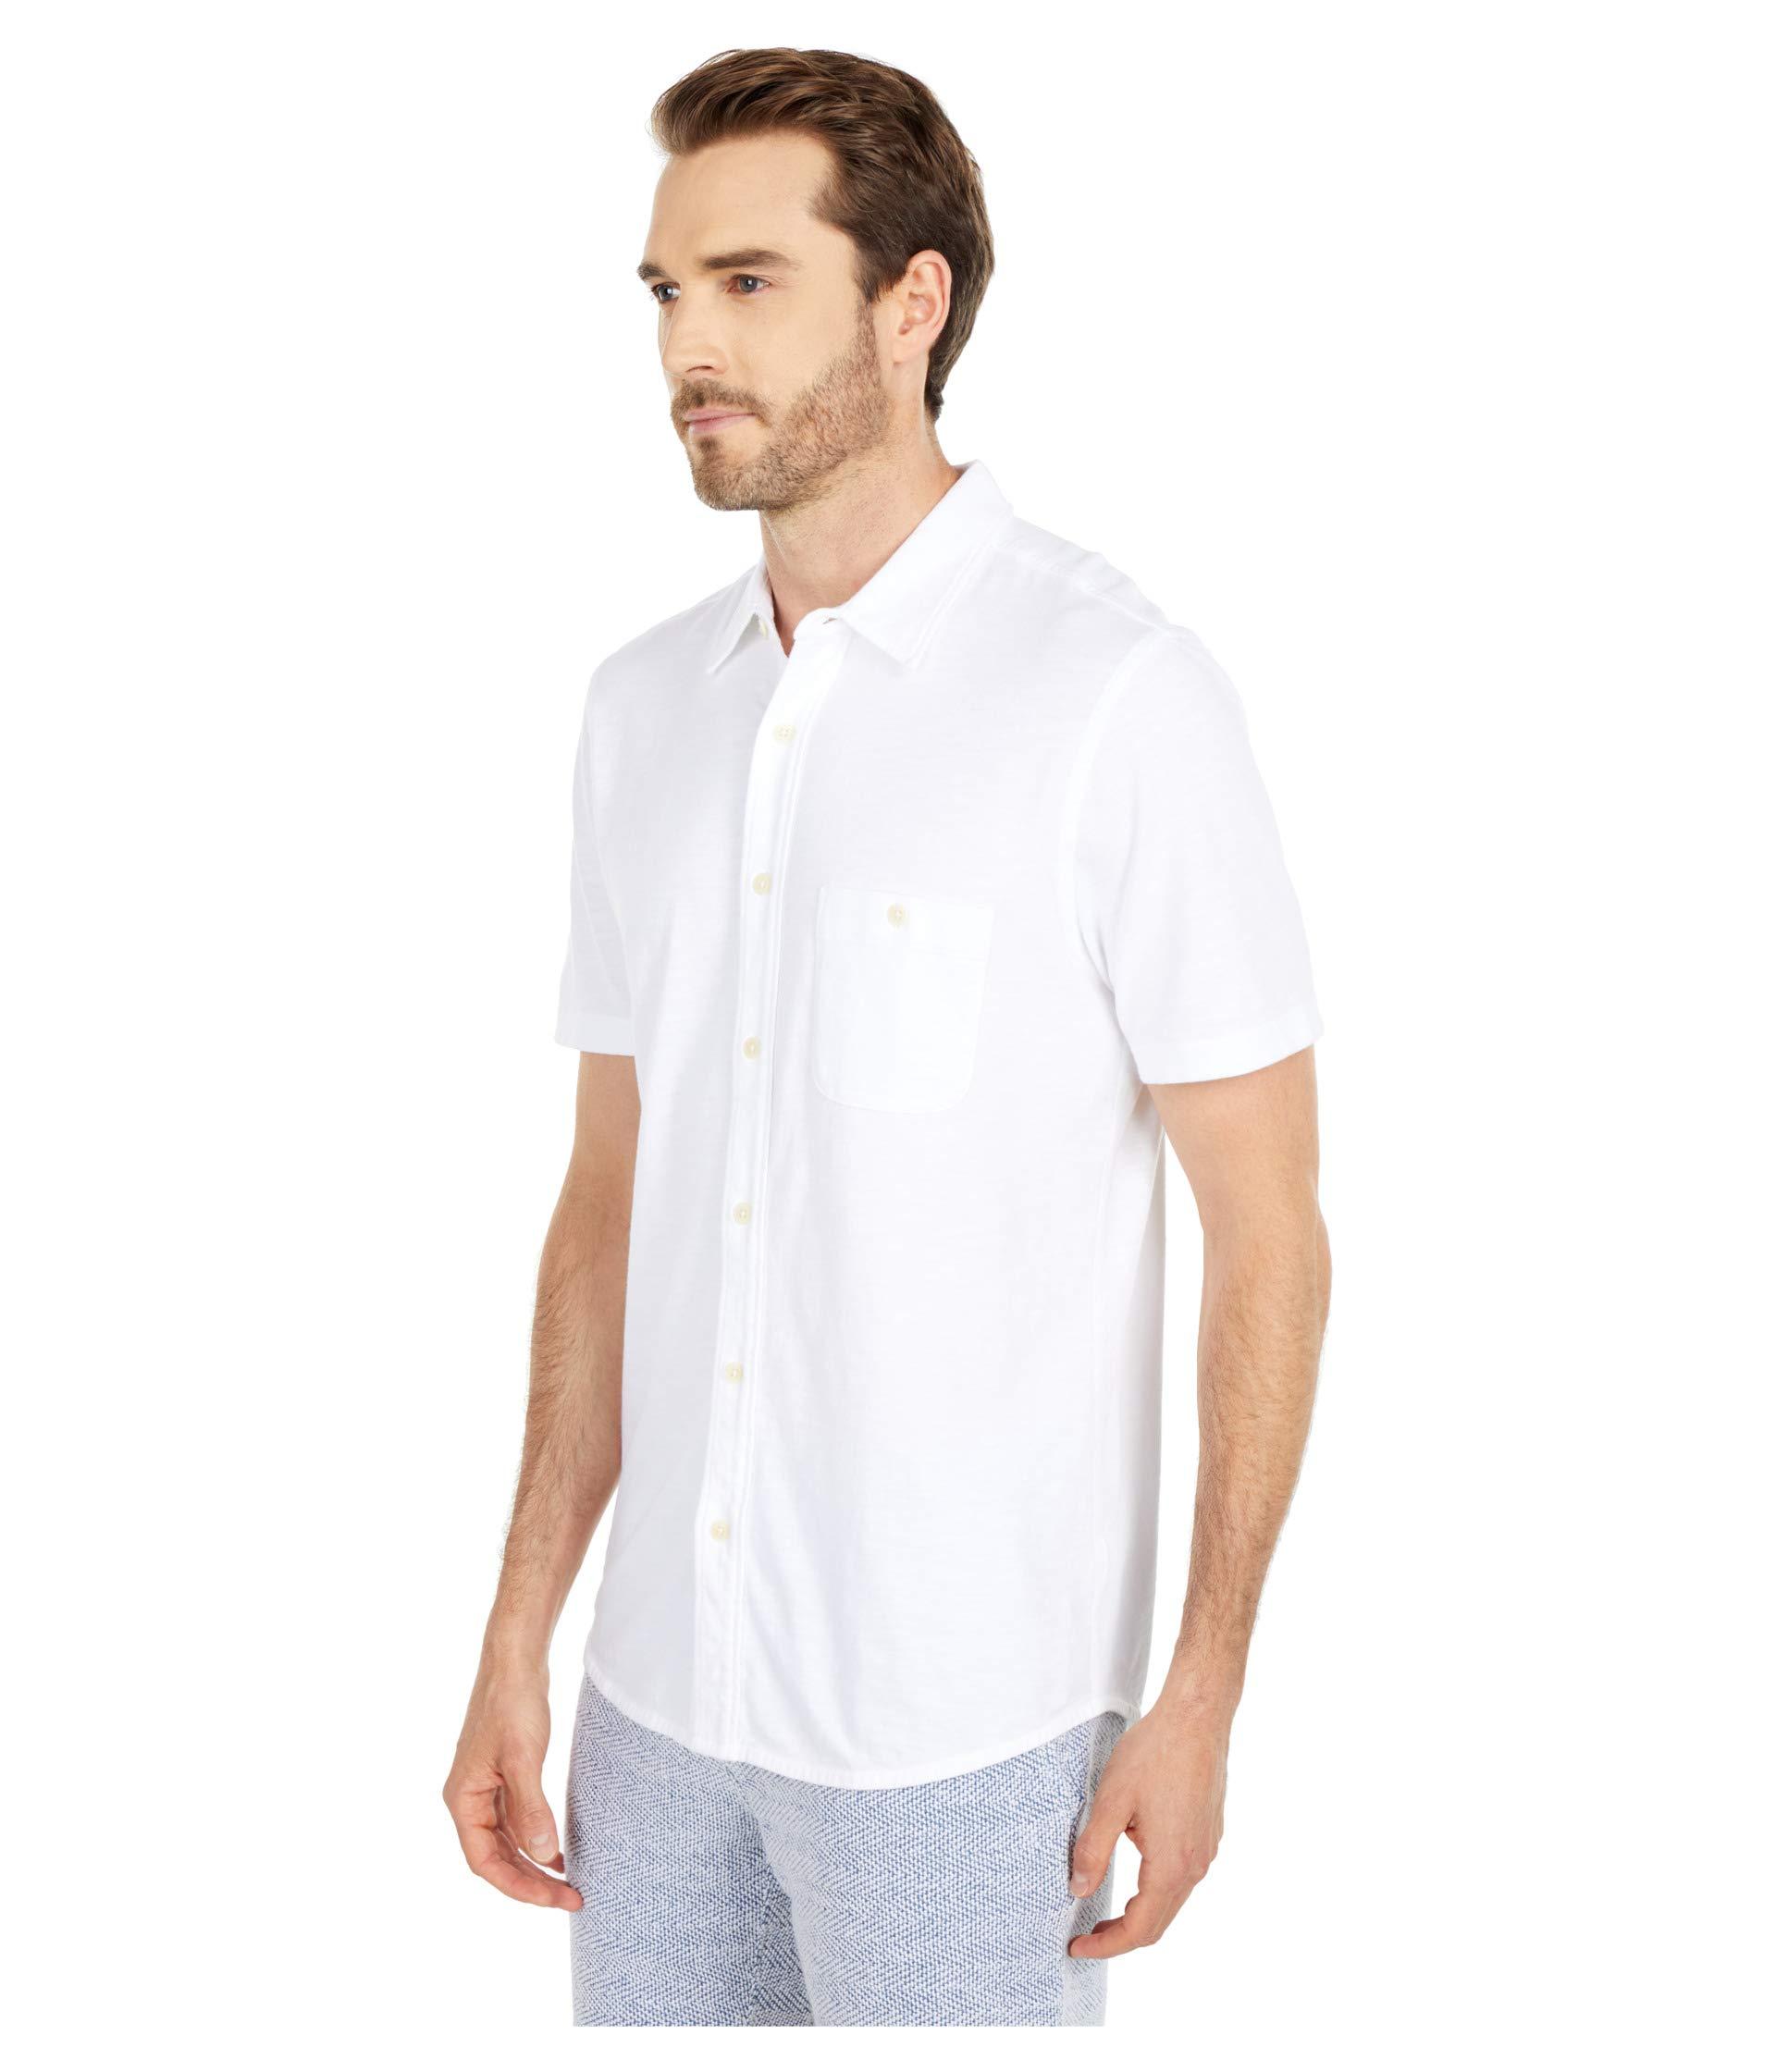 Faherty Brand Cotton Short Sleeve Knit Seasons Shirt in White for Men